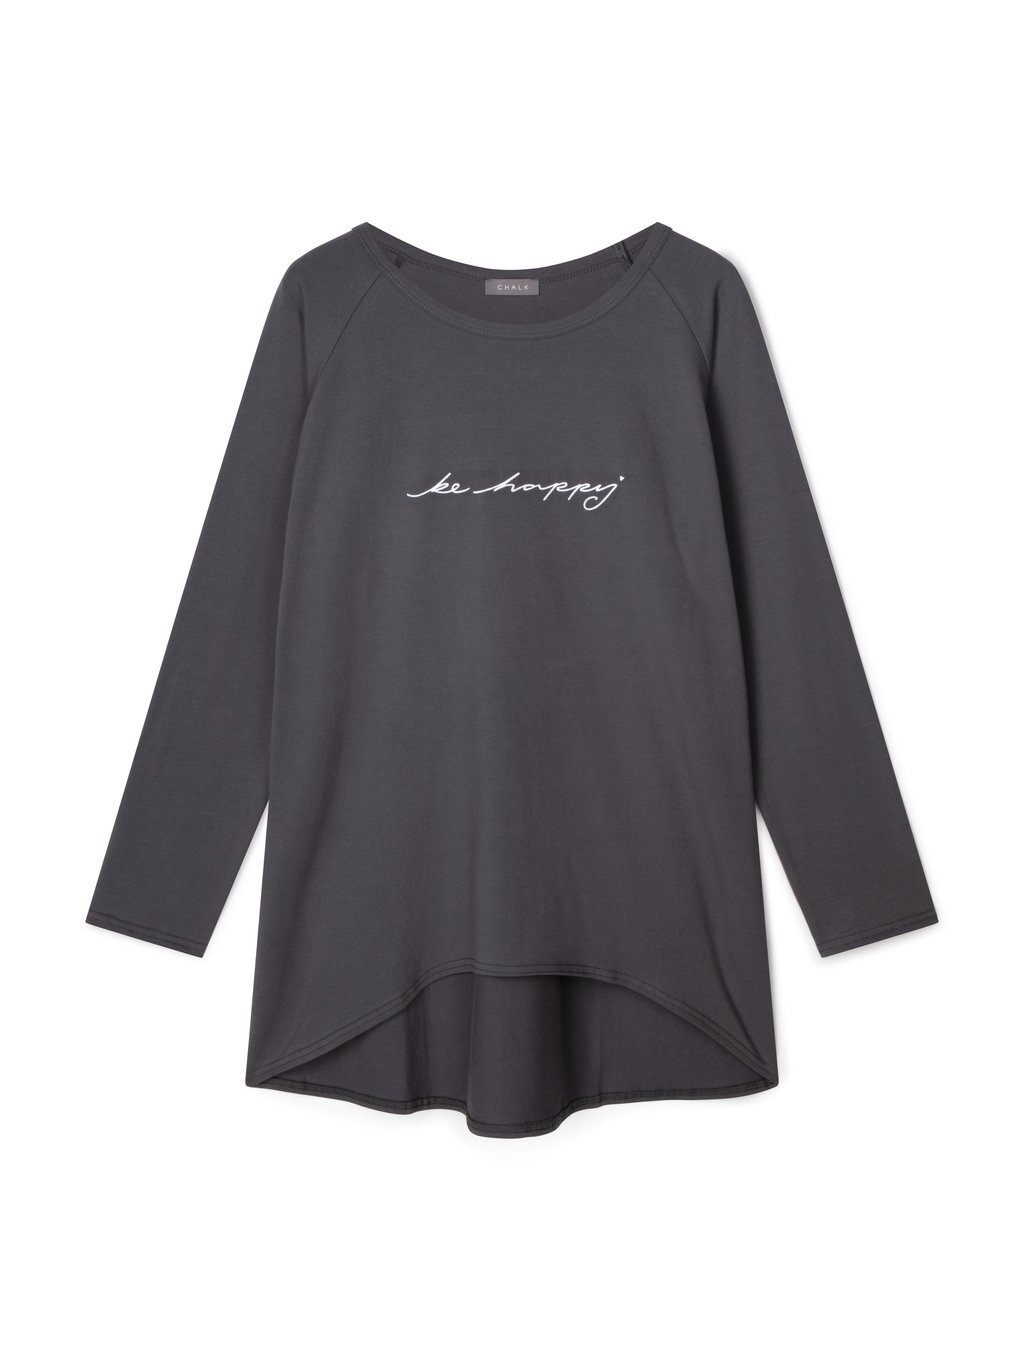 robyn_top_charcoal_script_be_happy_front-Edit_1024x.jpg